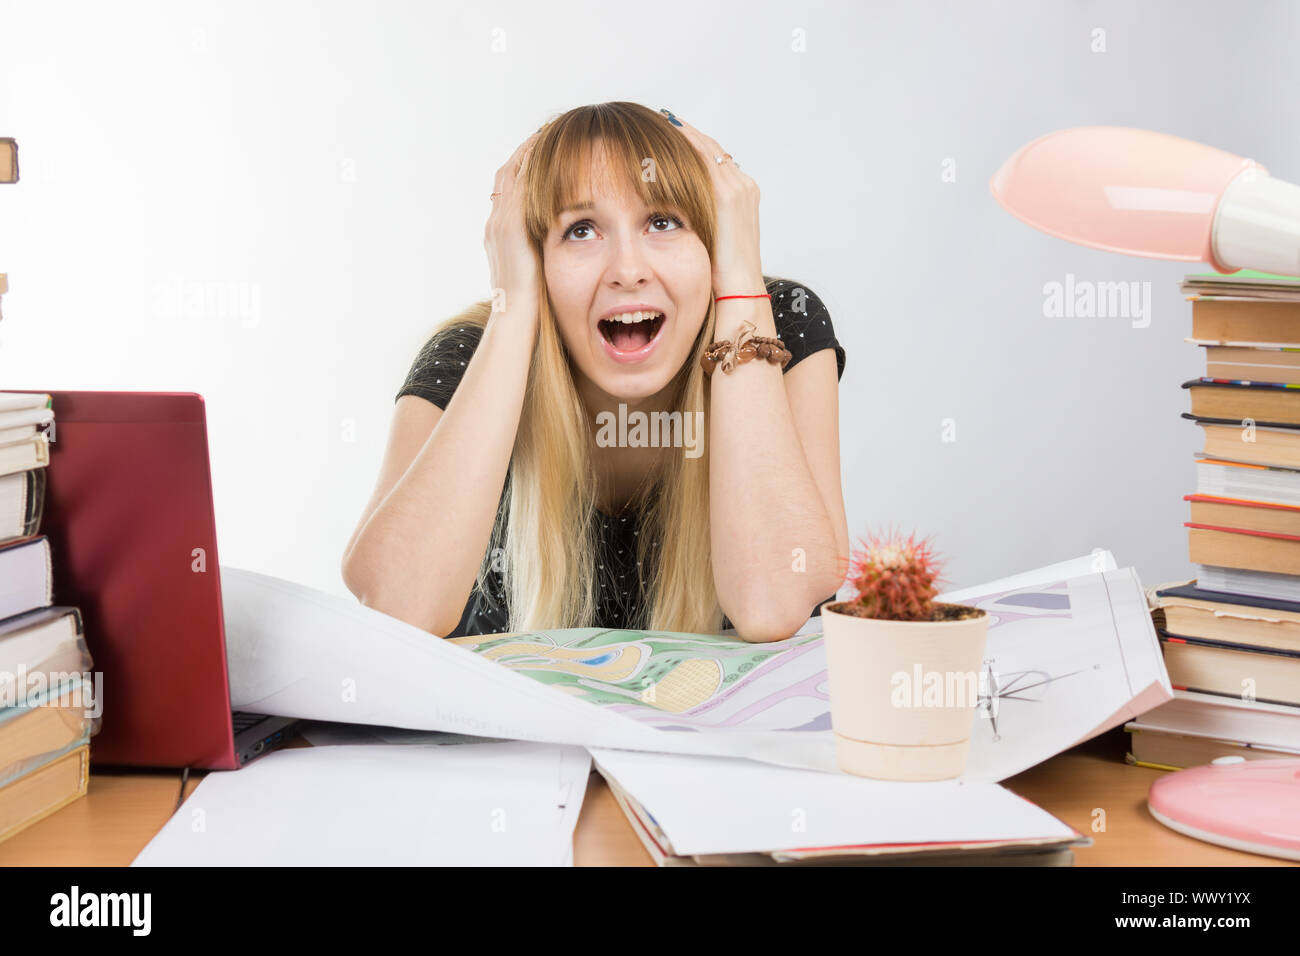 Girl design student at a desk with a pile of books and projects in desperation grabbed the head Stock Photo